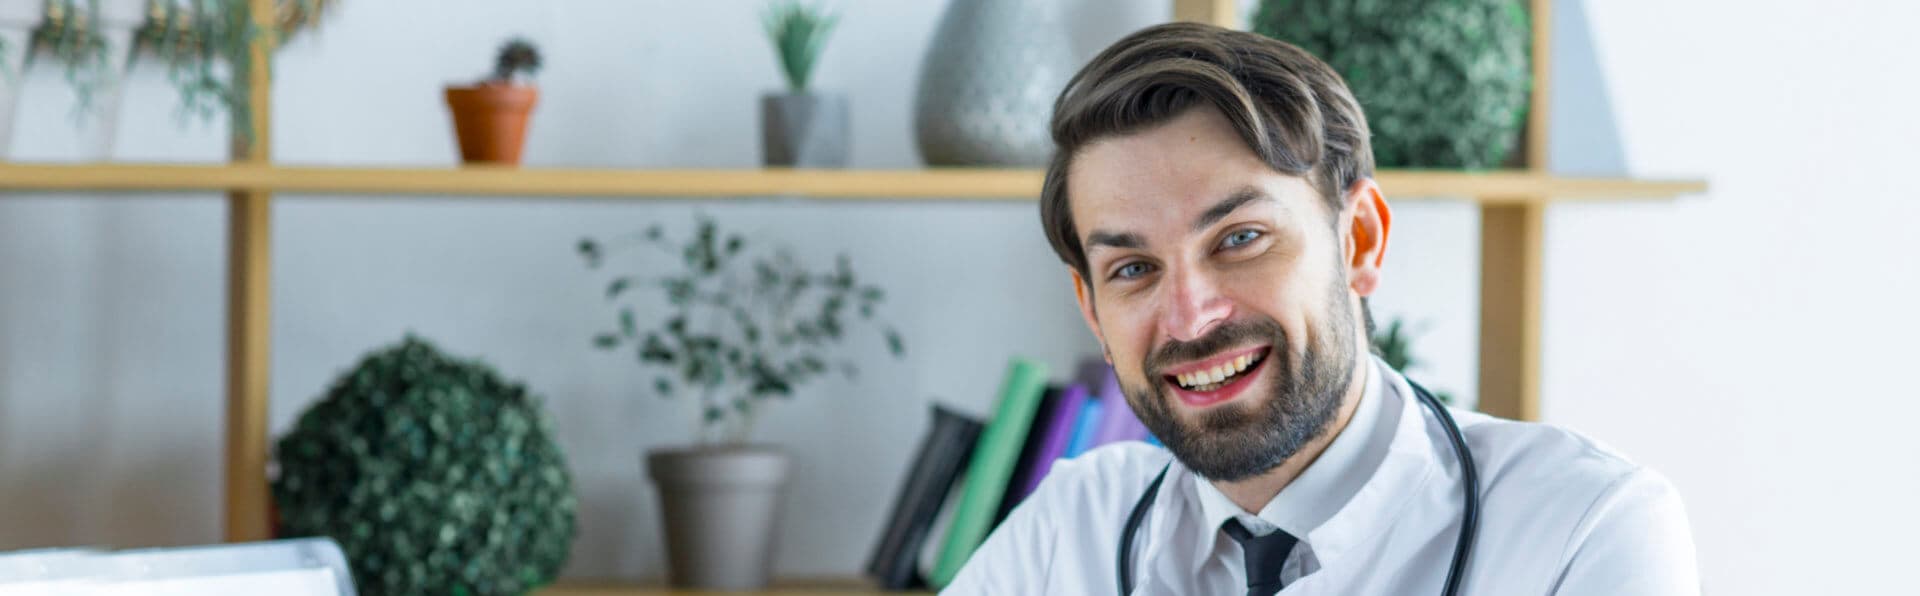 healthcare professional smiling